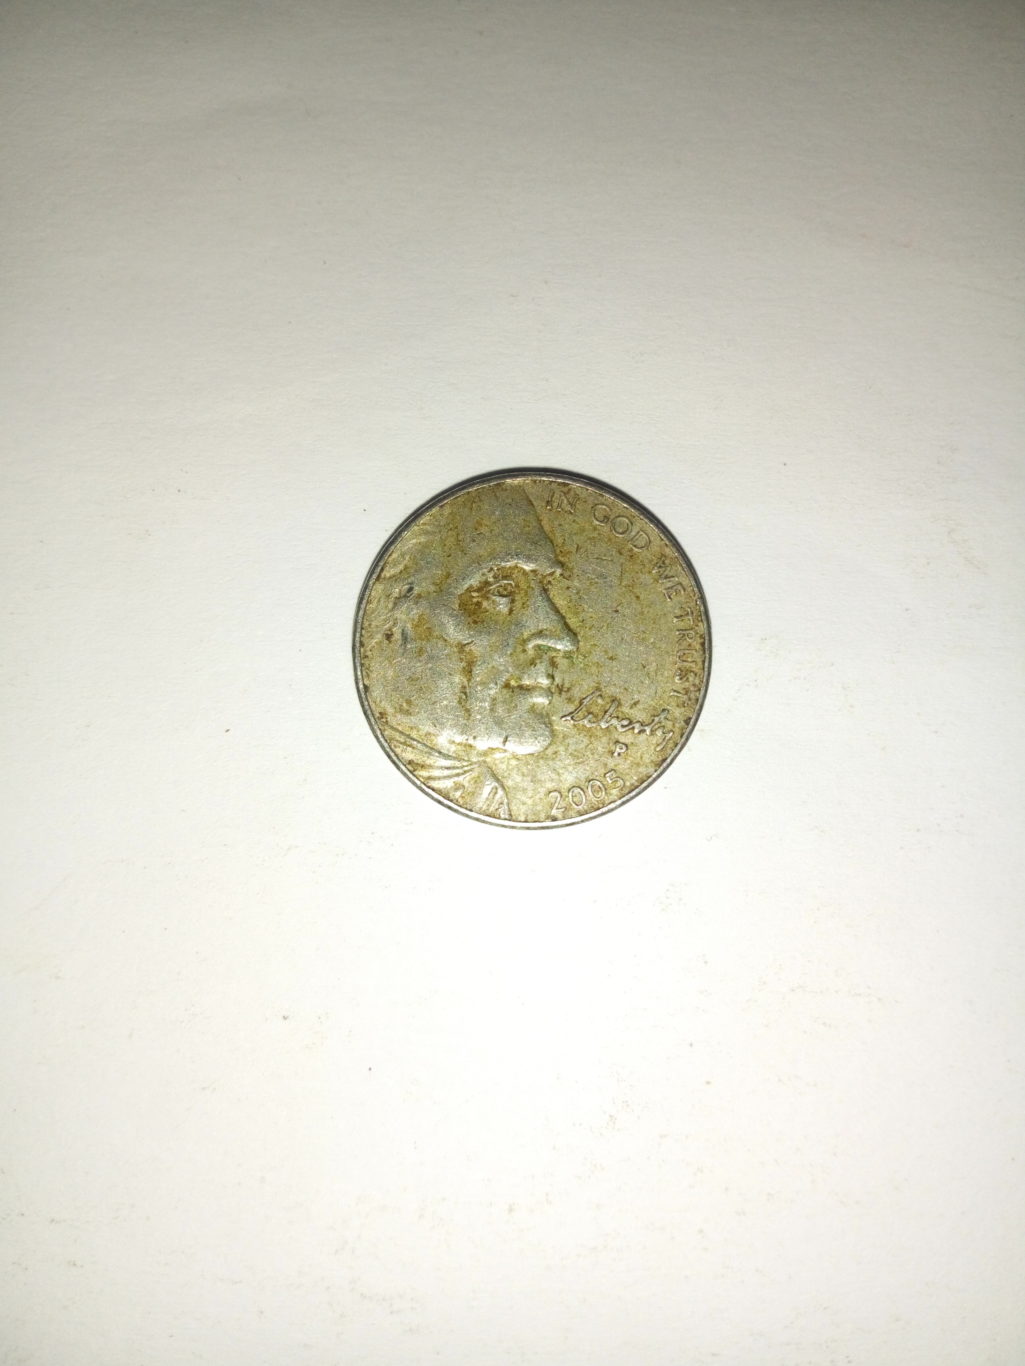 2005_5 cents